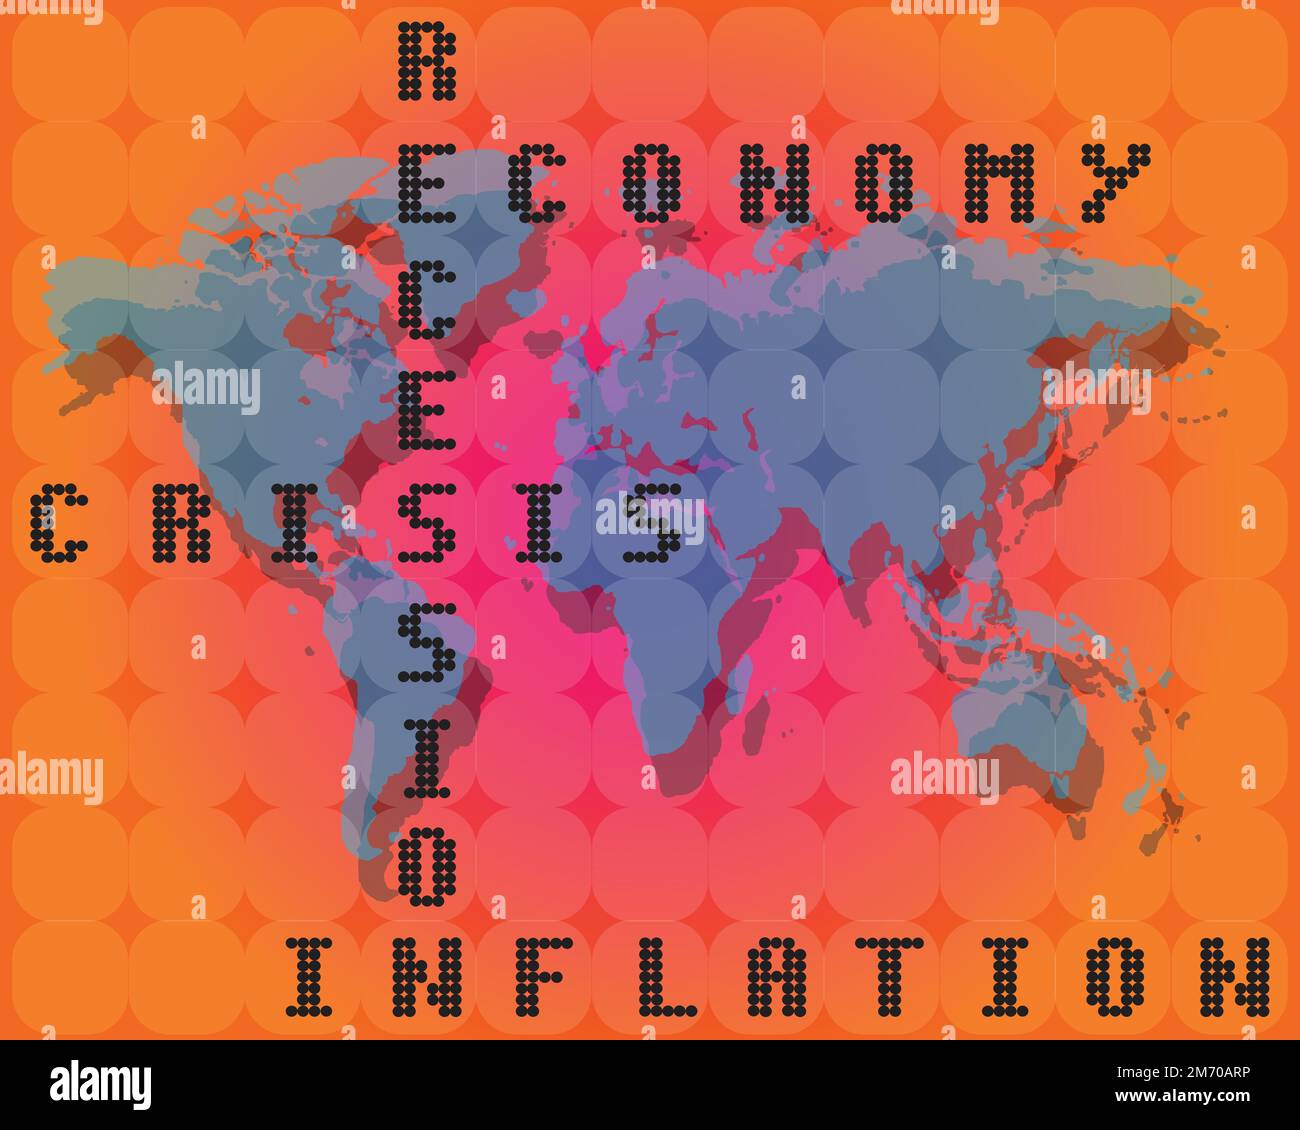 economic recession in 2023 Graphs and slumping stock markets show the global economic crisis in 2023. The effects of inflation, war, epidemics. EPS10 Stock Vector